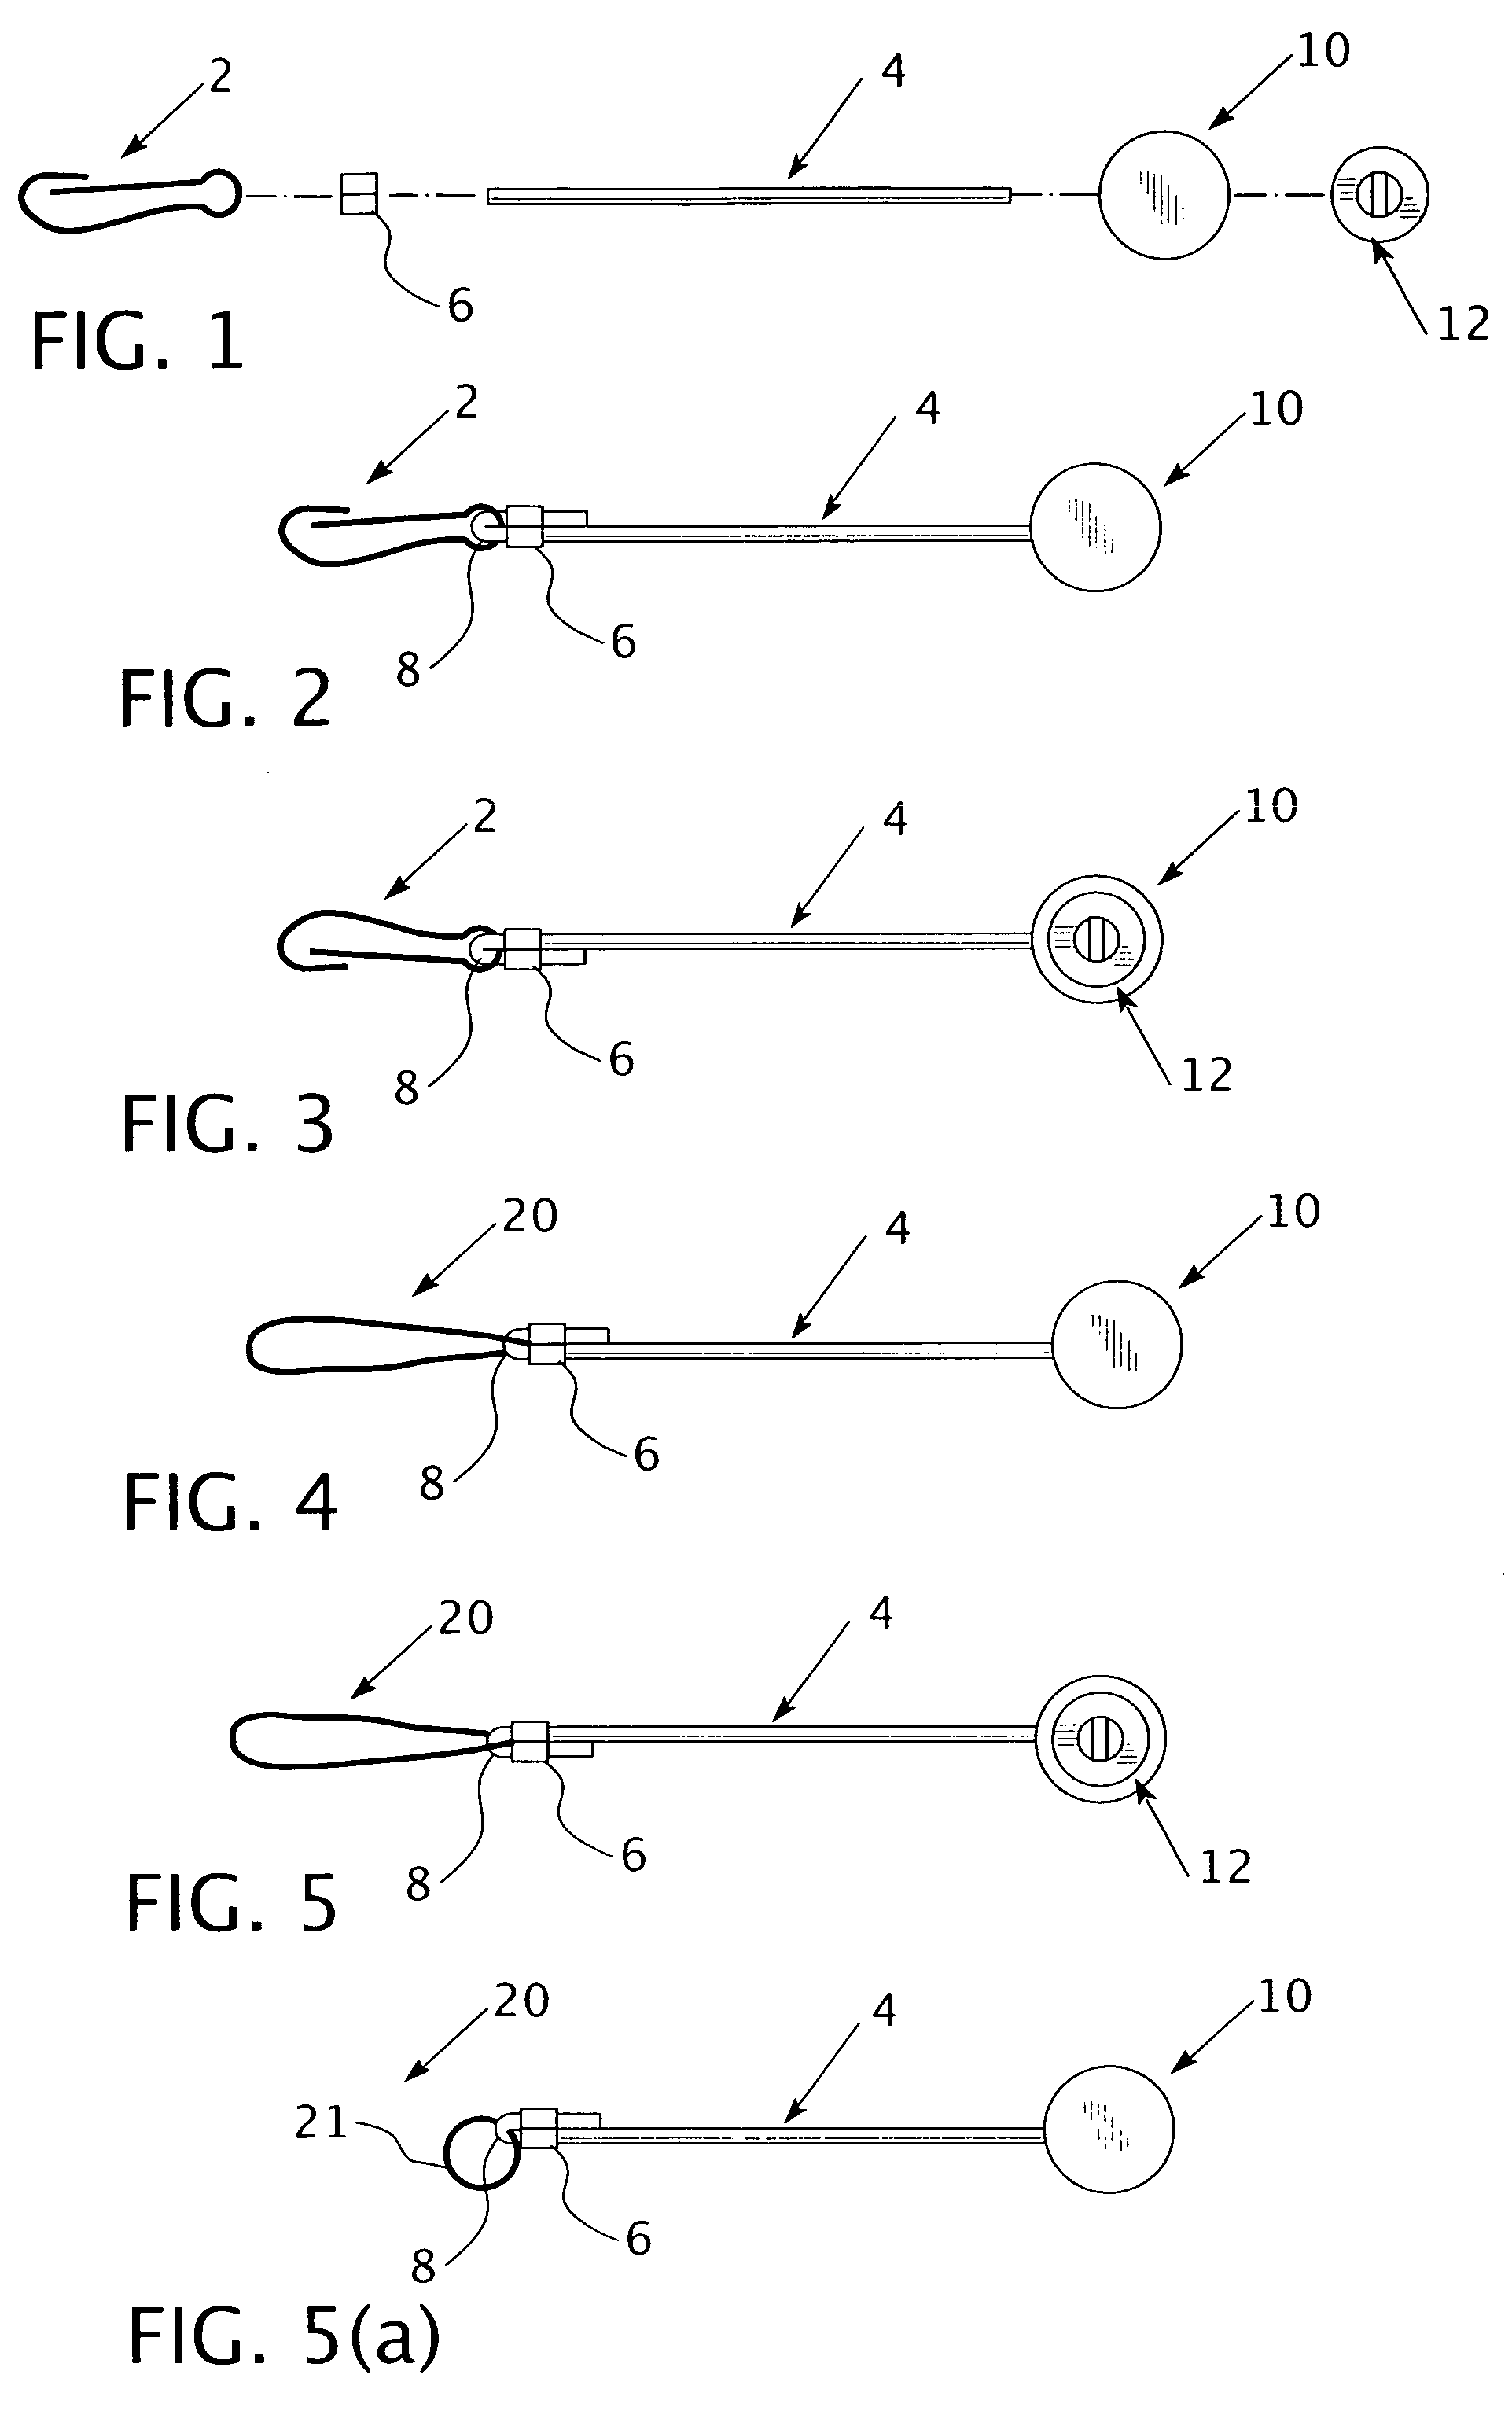 Carrier for securing a portable digital information device on an identification badge or identification badge holder or information article